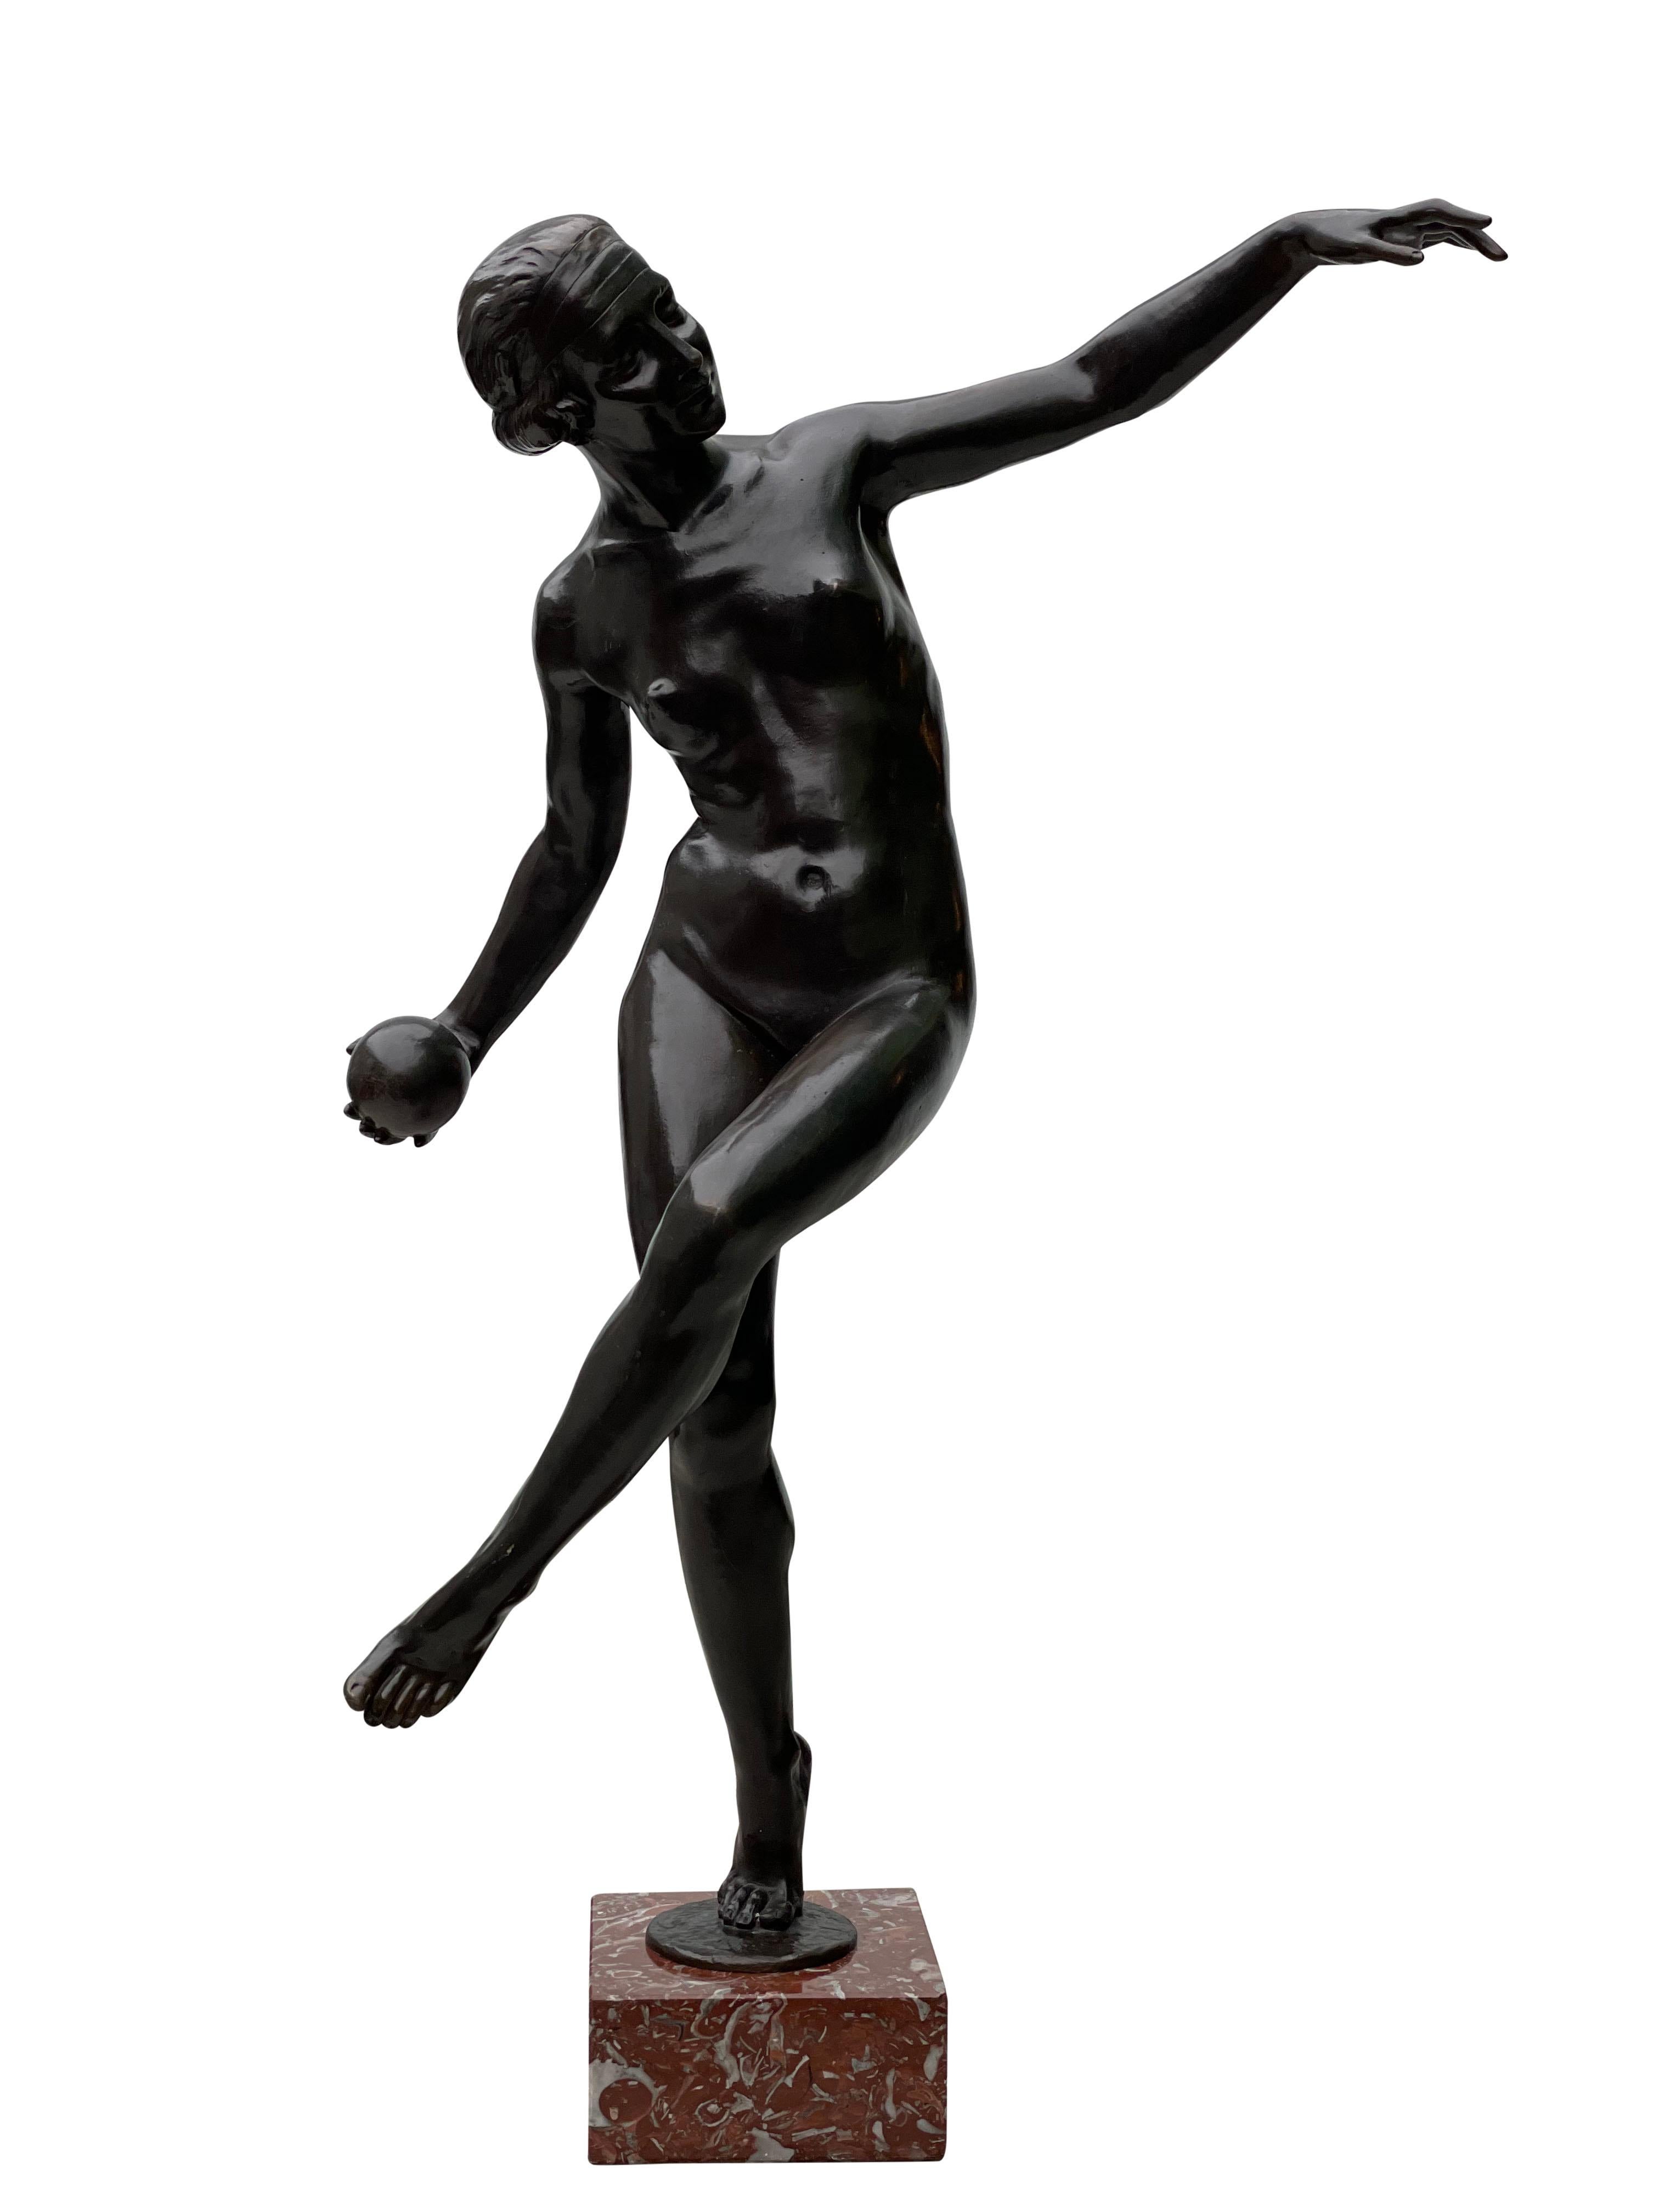 A stunning original bronze Art Deco nude lady balancing ball sculpture, circa 1920s. Rosso Verona marble base, signed by artist.